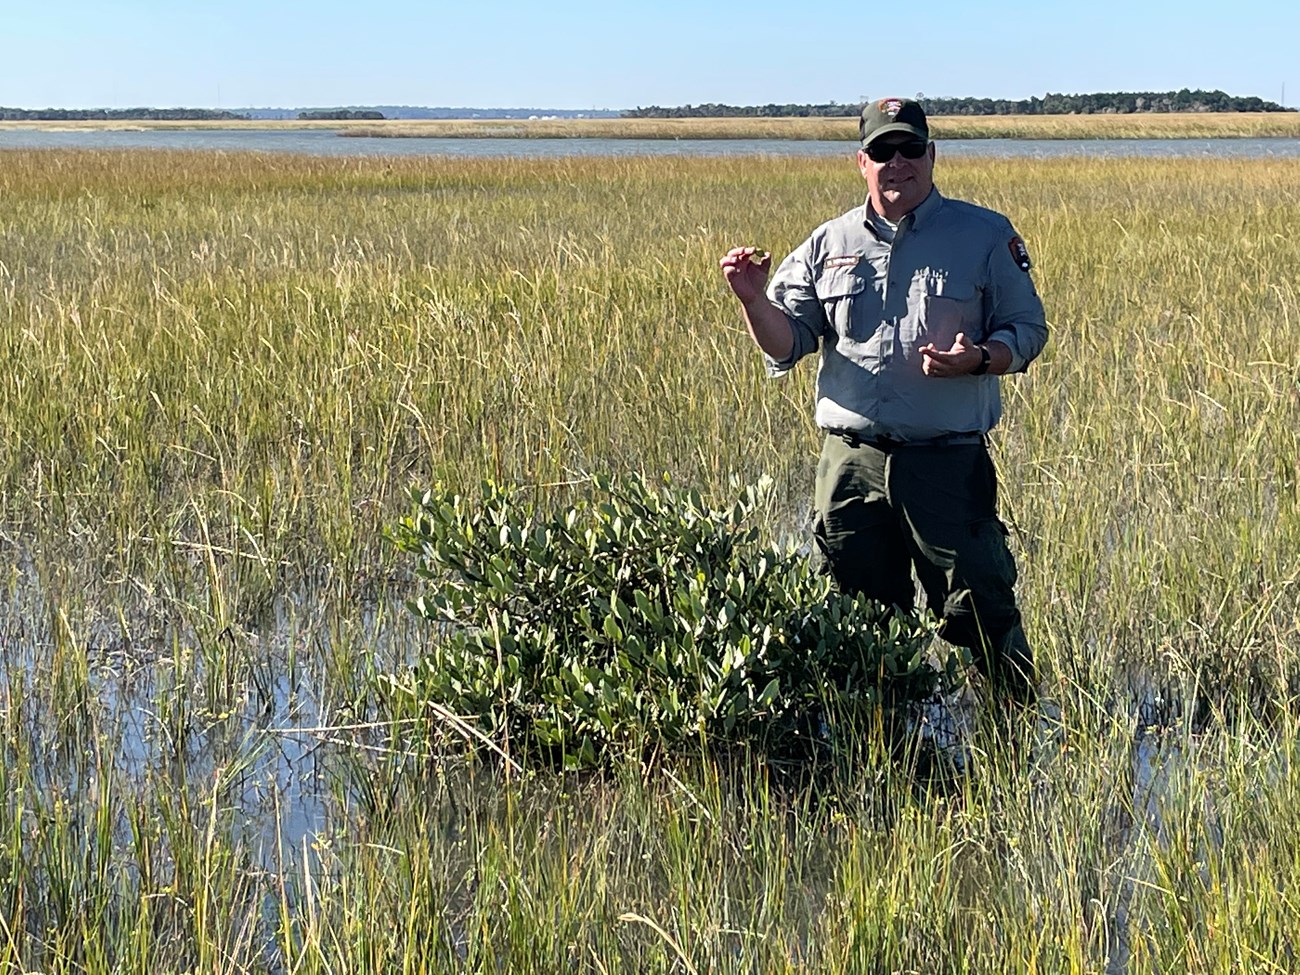 Aman standing in a in salt marsh with a small mangrove tree. He is wearing a Park Service uniform and holding a propagule.